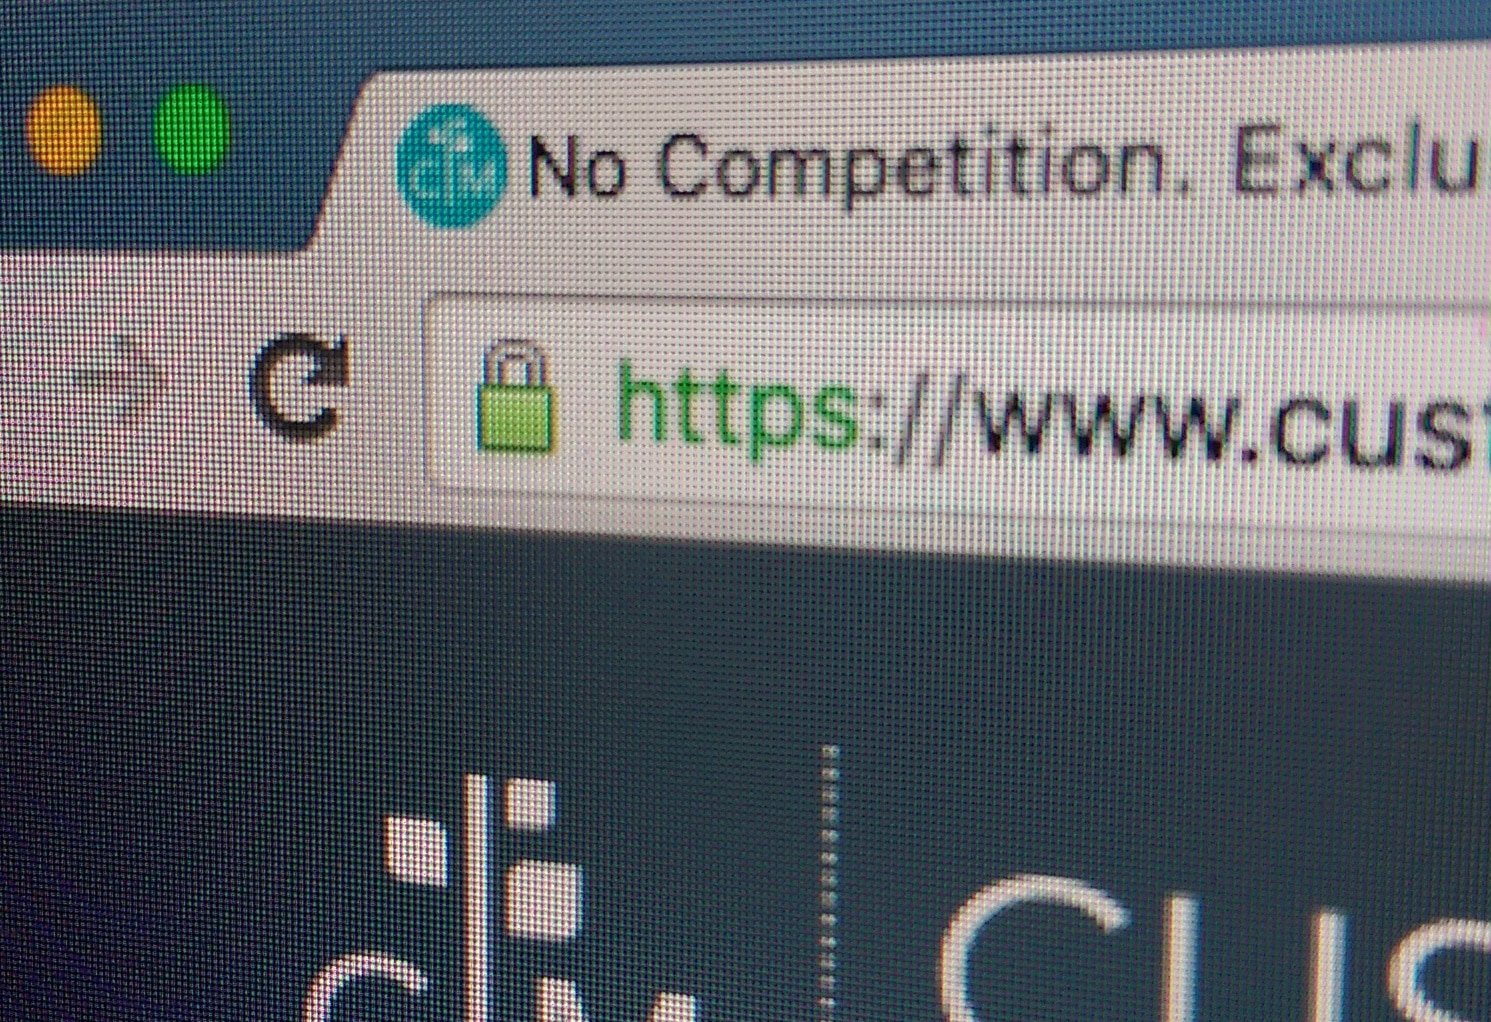 HTTPS is taking over Google search results: Are law firms keeping up?